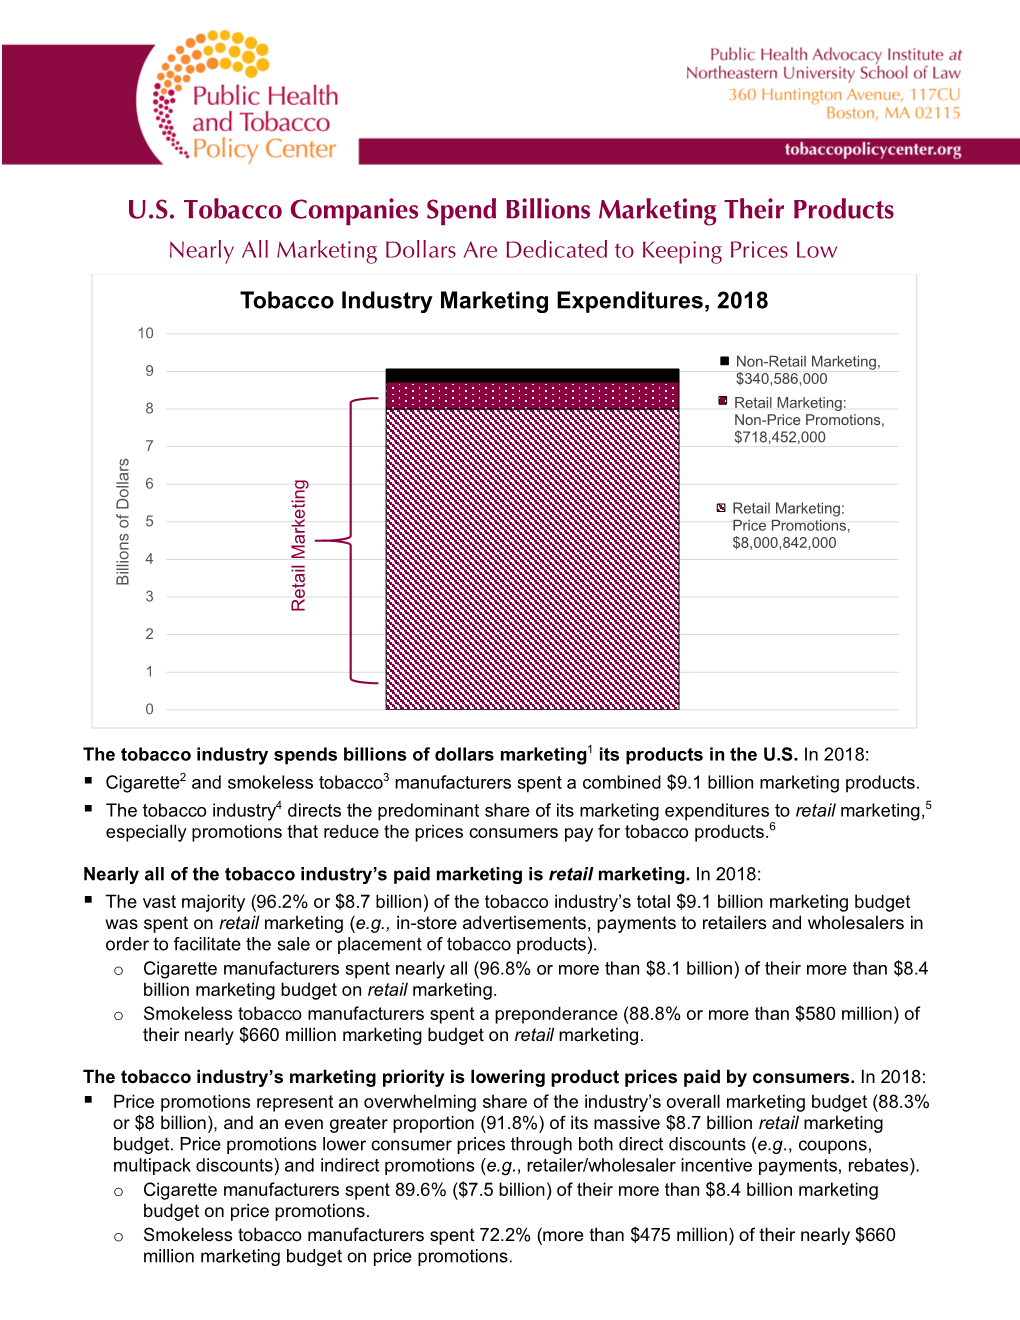 U.S. Tobacco Companies Spend Billions Marketing Their Products Nearly All Marketing Dollars Are Dedicated to Keeping Prices Low